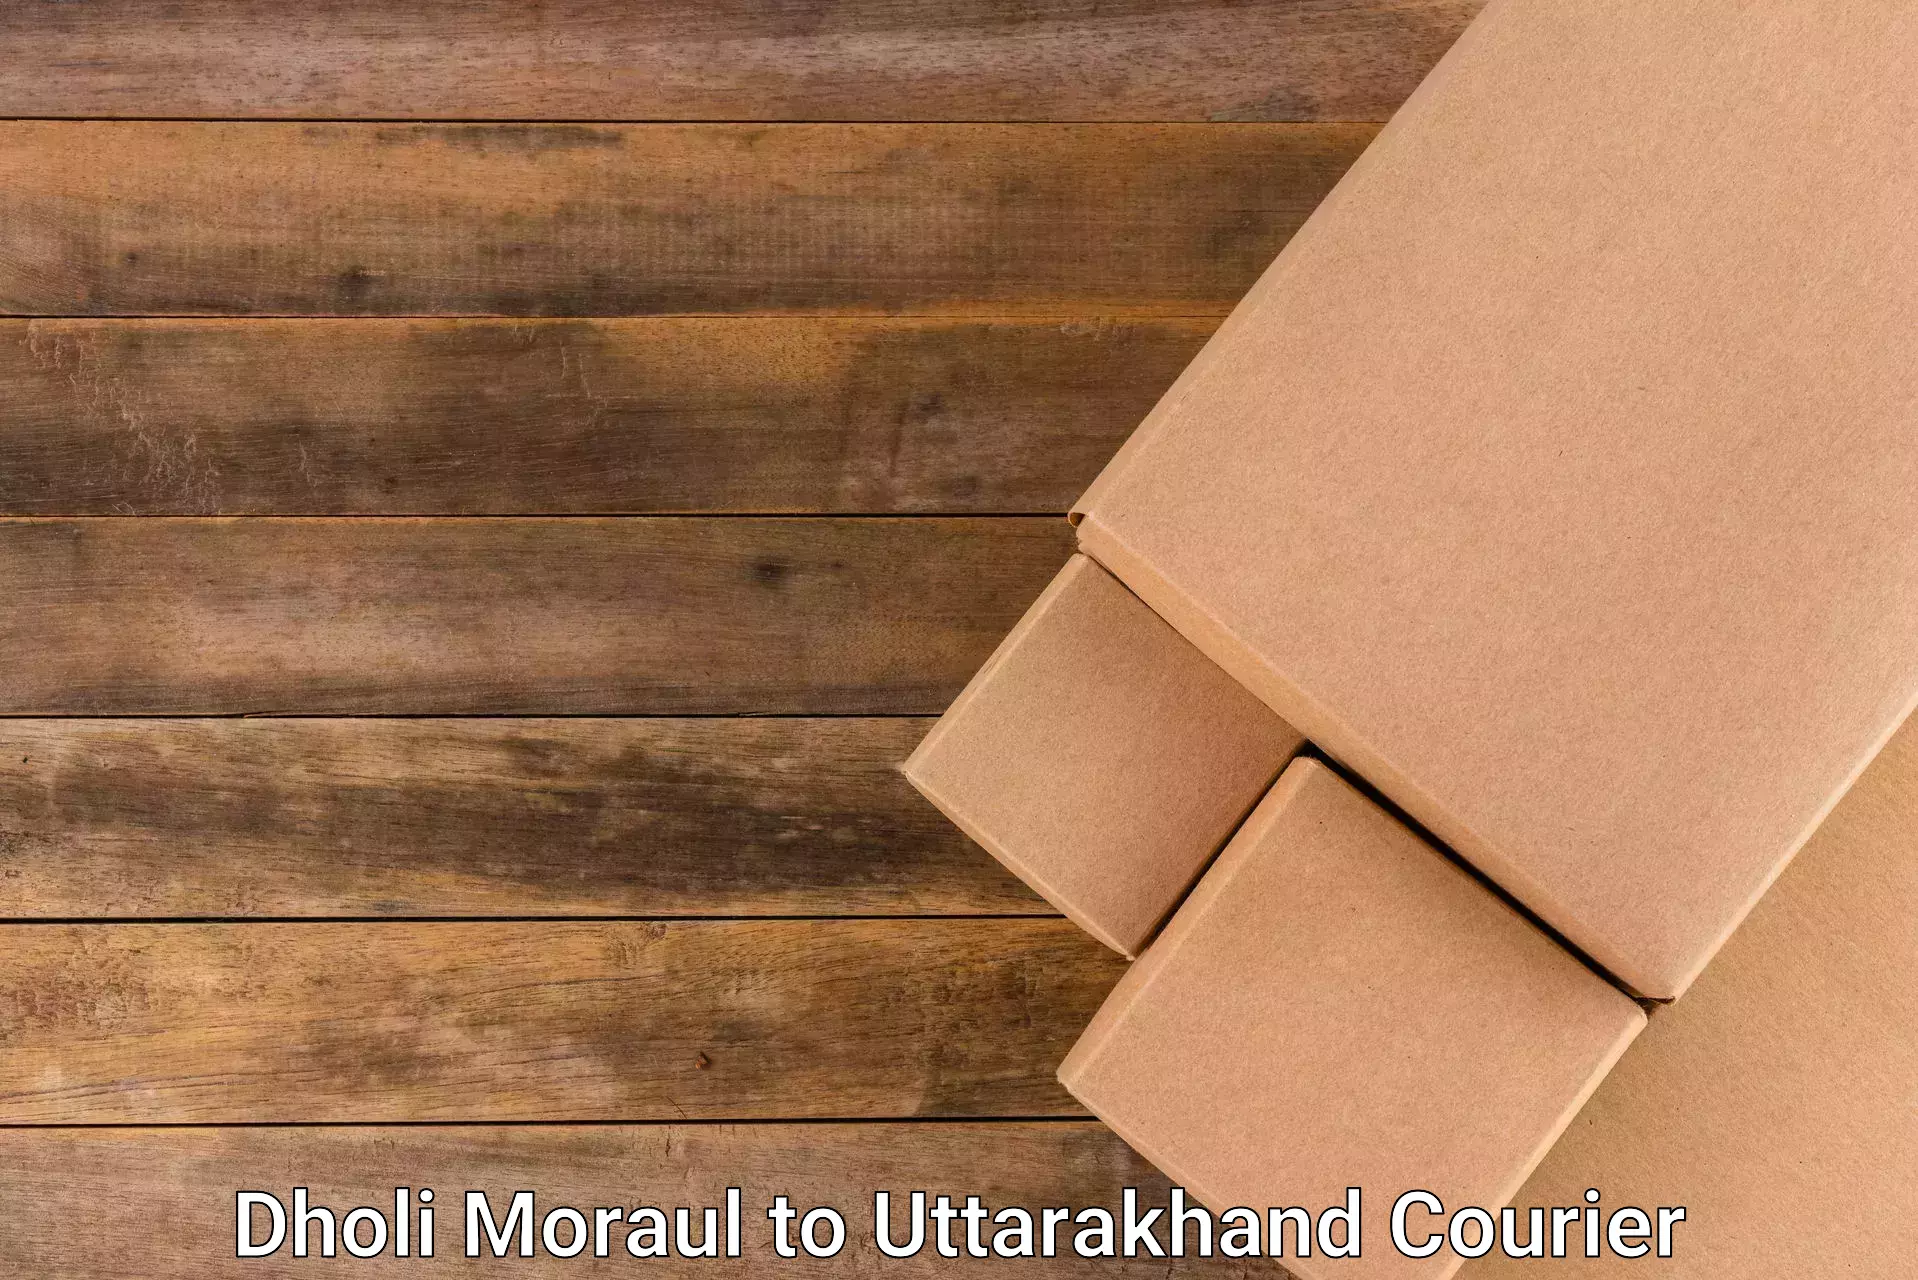 Global courier networks Dholi Moraul to Rishikesh